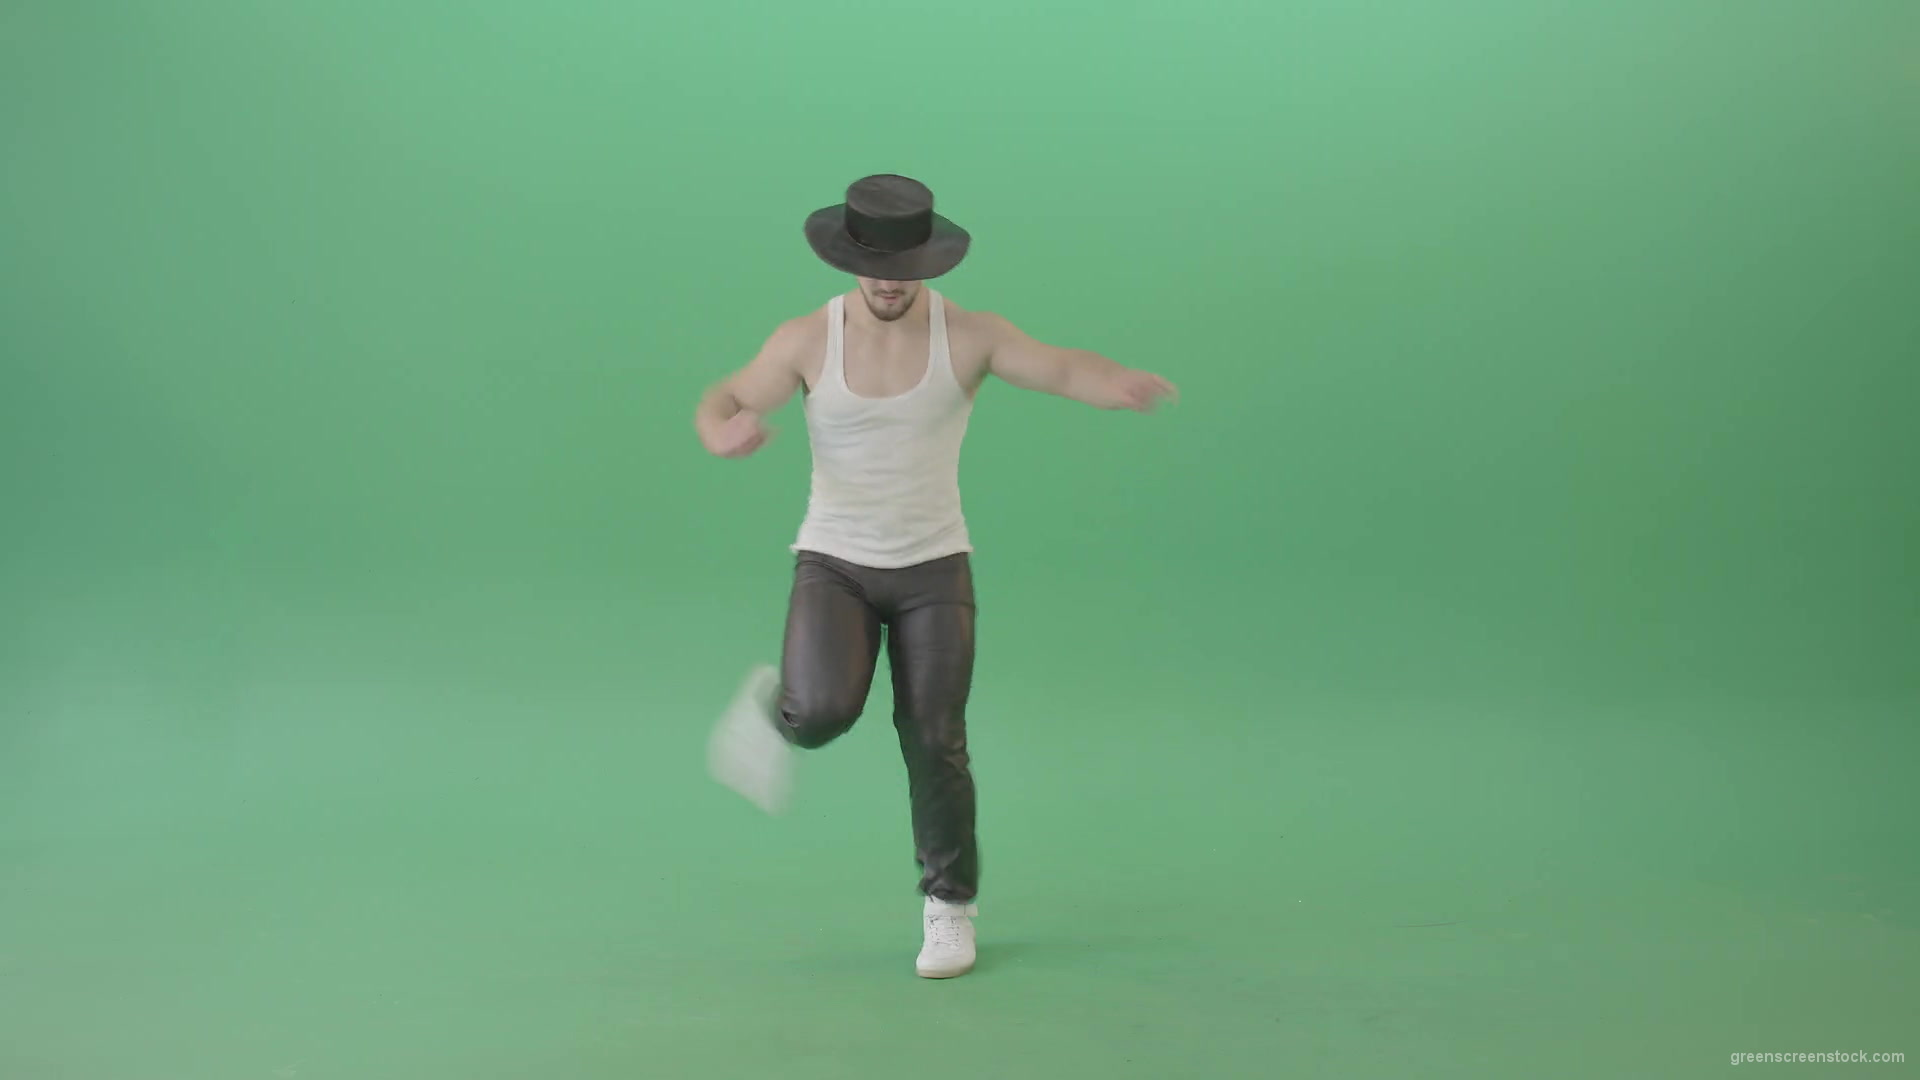 Adult-Man-makes-moonwalk-and-dancing-Pop-isolated-on-Green-Screen-4K-Video-Footage-1920_007 Green Screen Stock